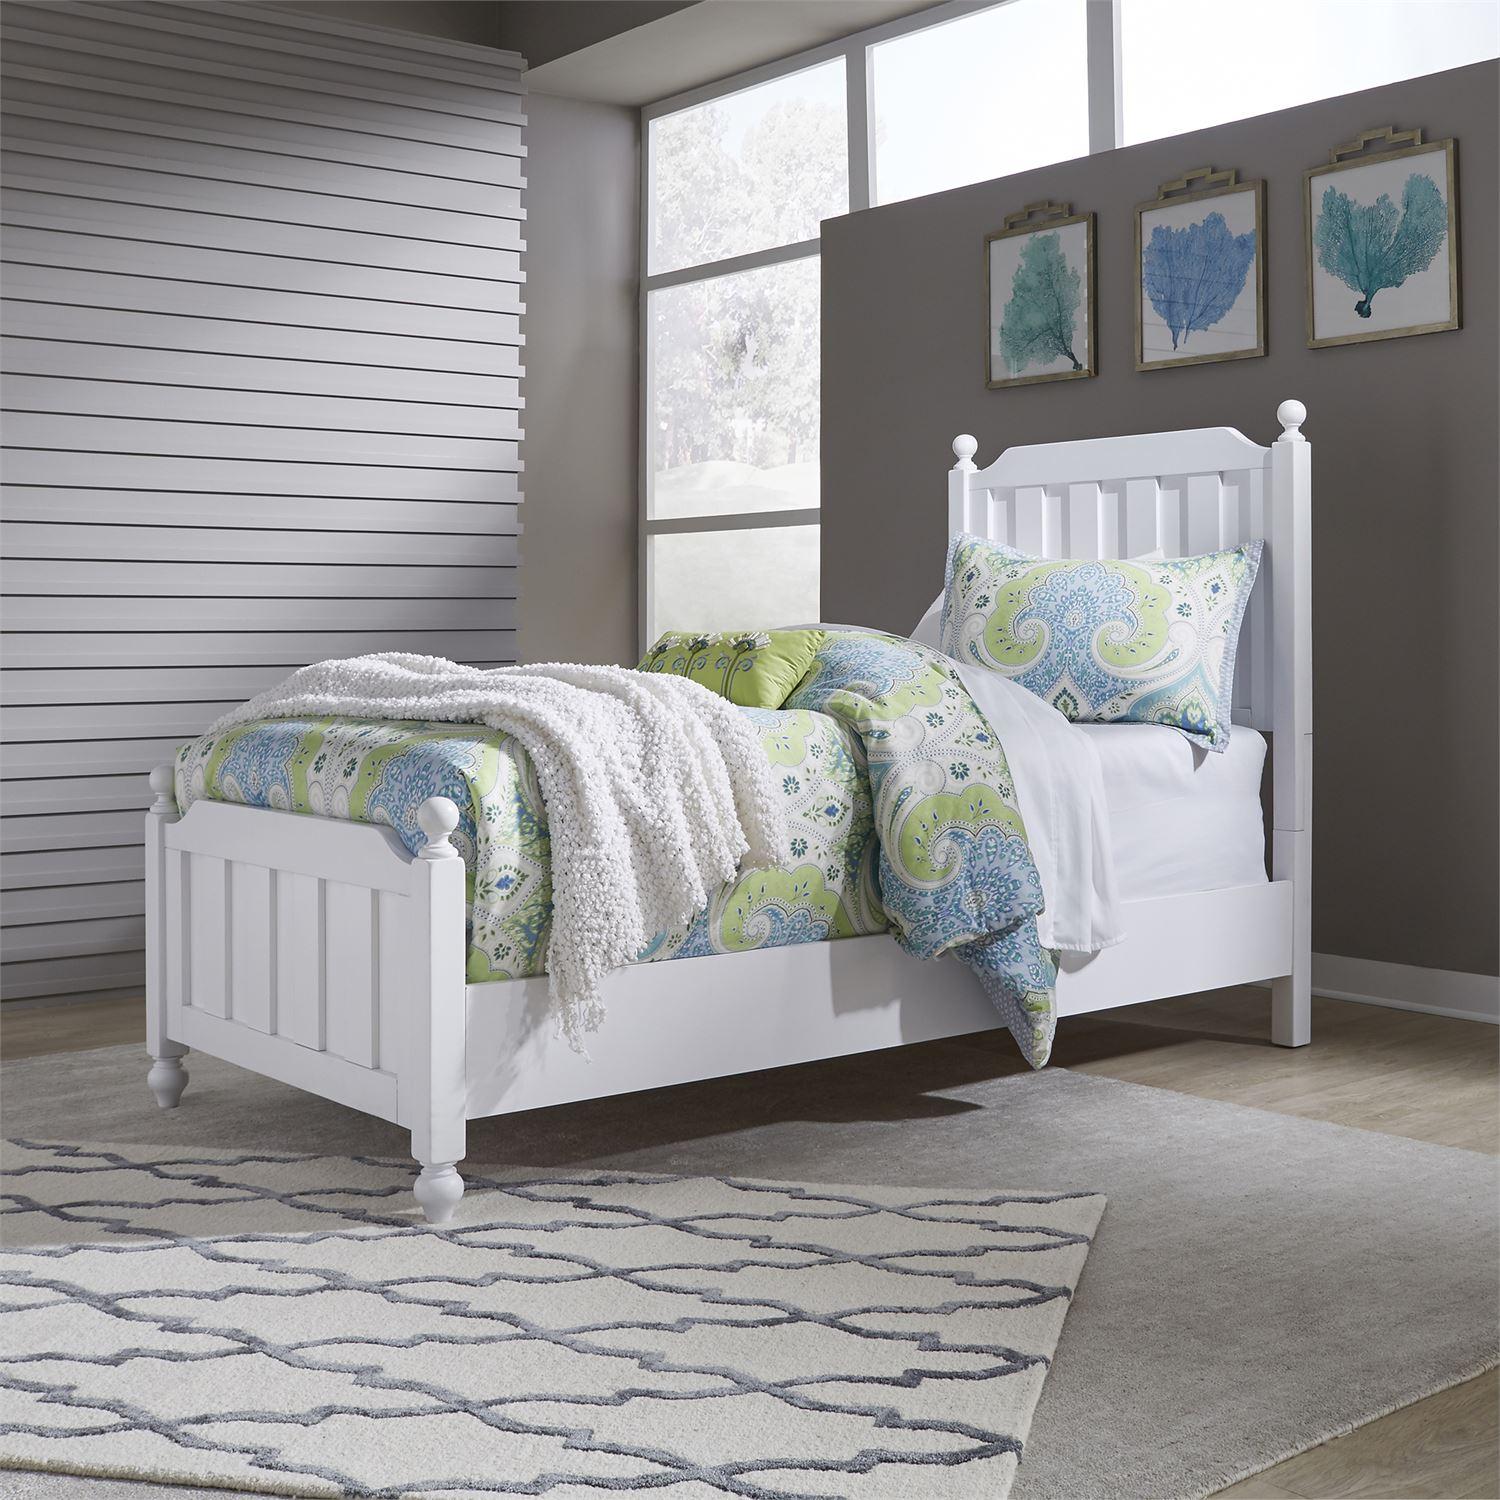 Cottage Panel Bed Cottage View  (523-YBR) Panel Bed 523-YBR-TPB in White 